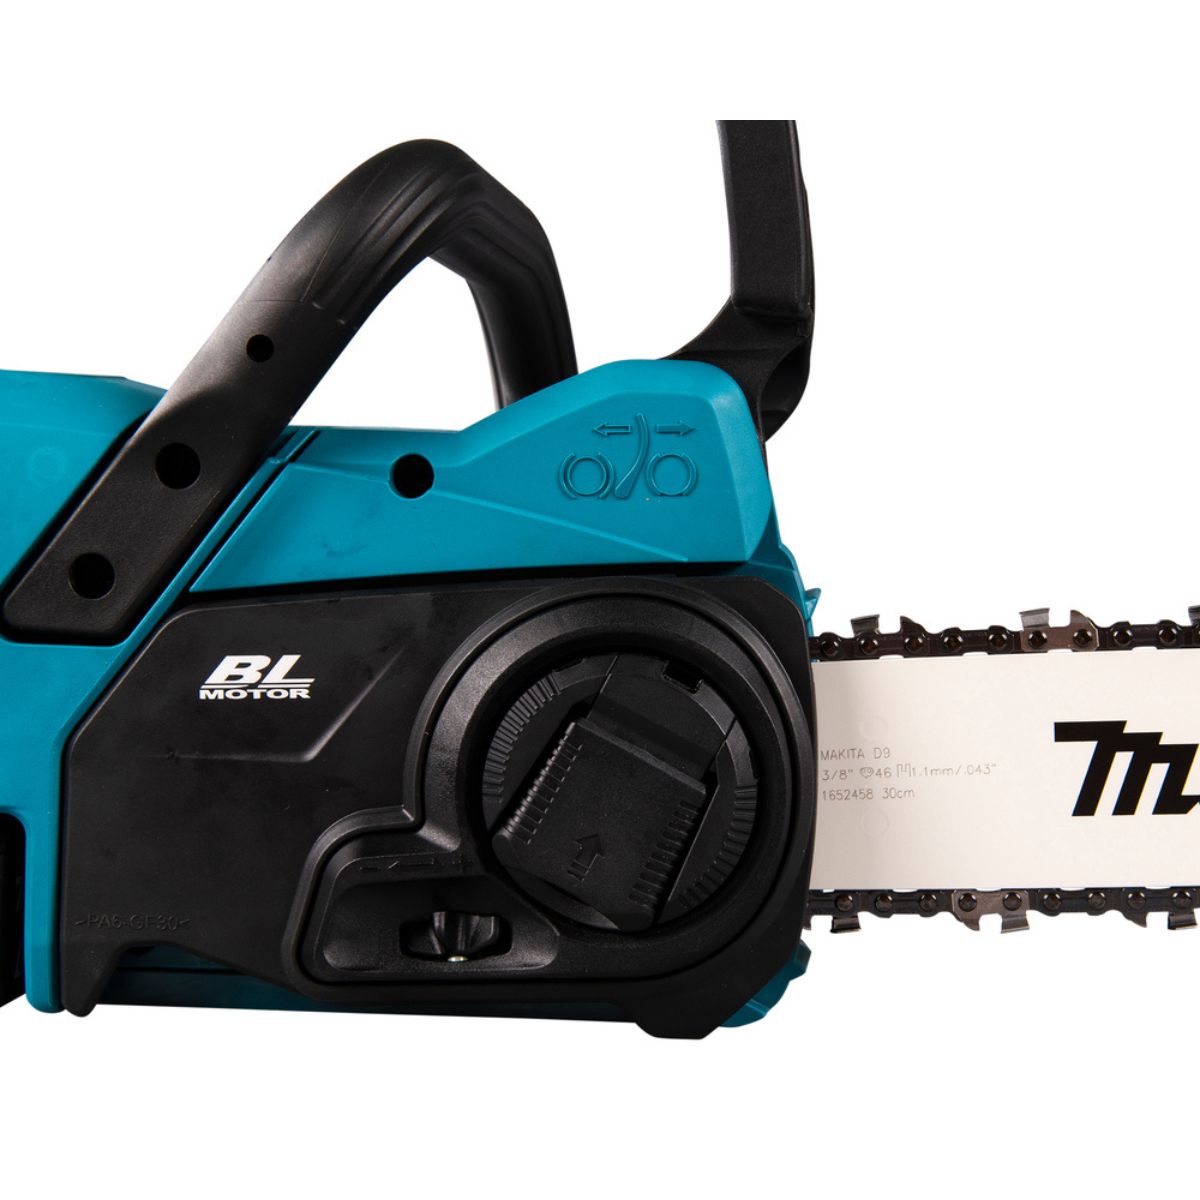 Makita DUC307ZX2 18V LXT Brushless 300mm Chainsaw Body Only